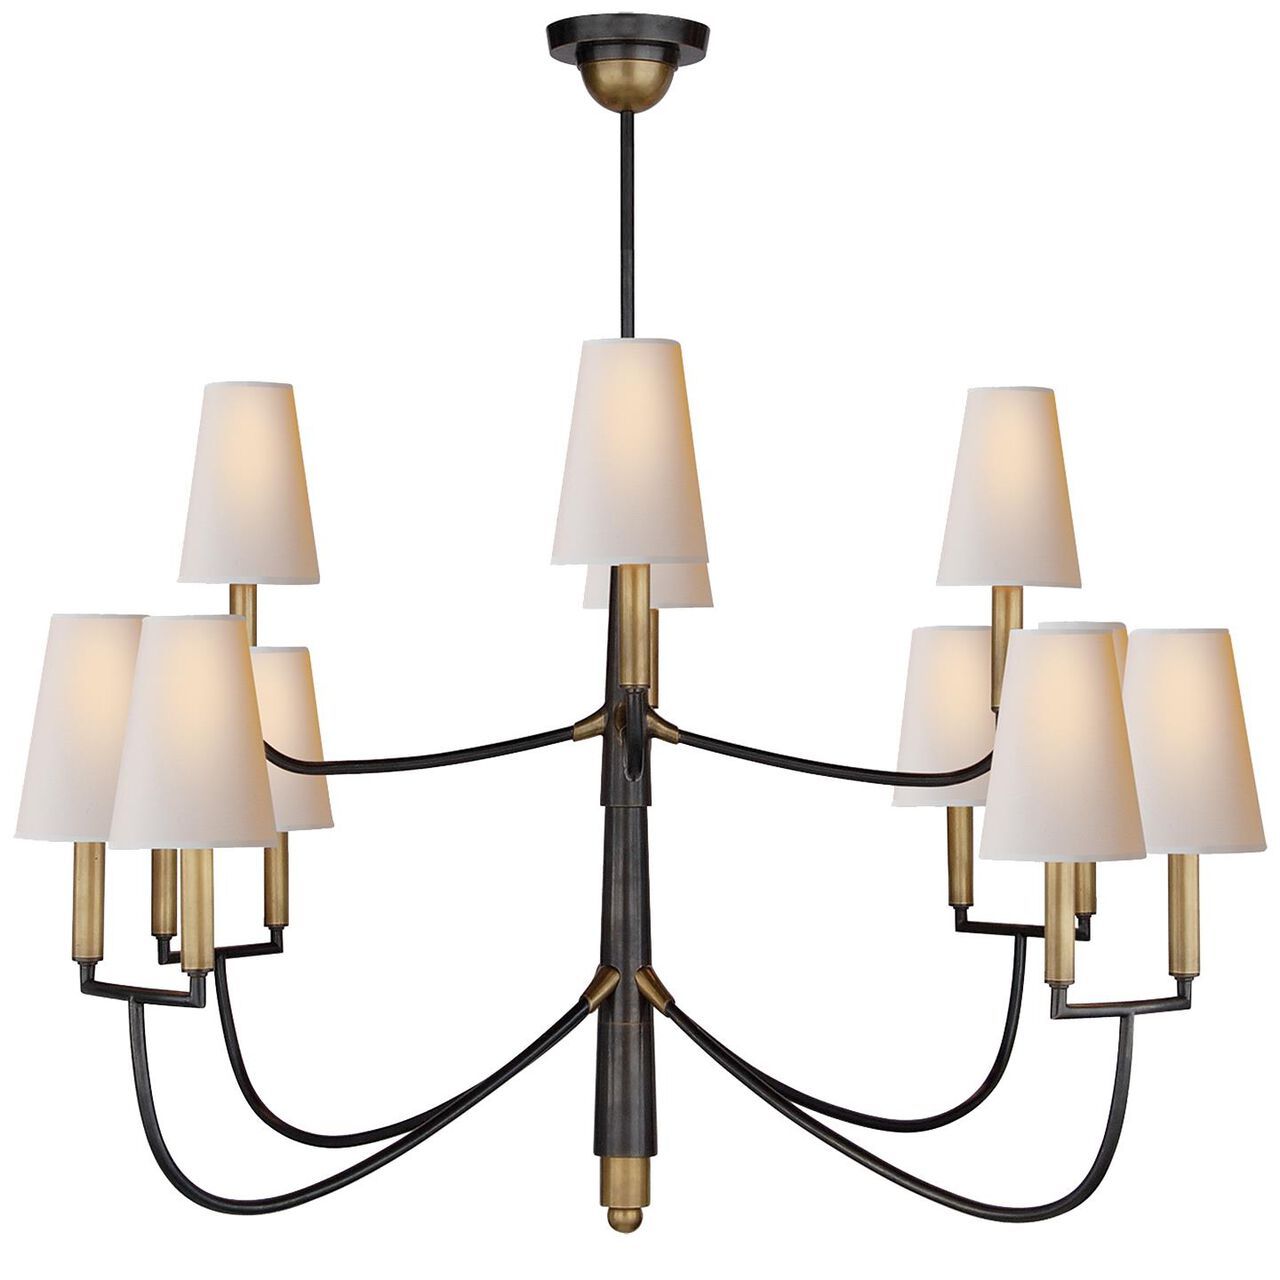 Thomas O'Brien Farlane 48 Inch 12 Light Chandelier by Visual Comfort and Co. | Capitol Lighting 1800lighting.com